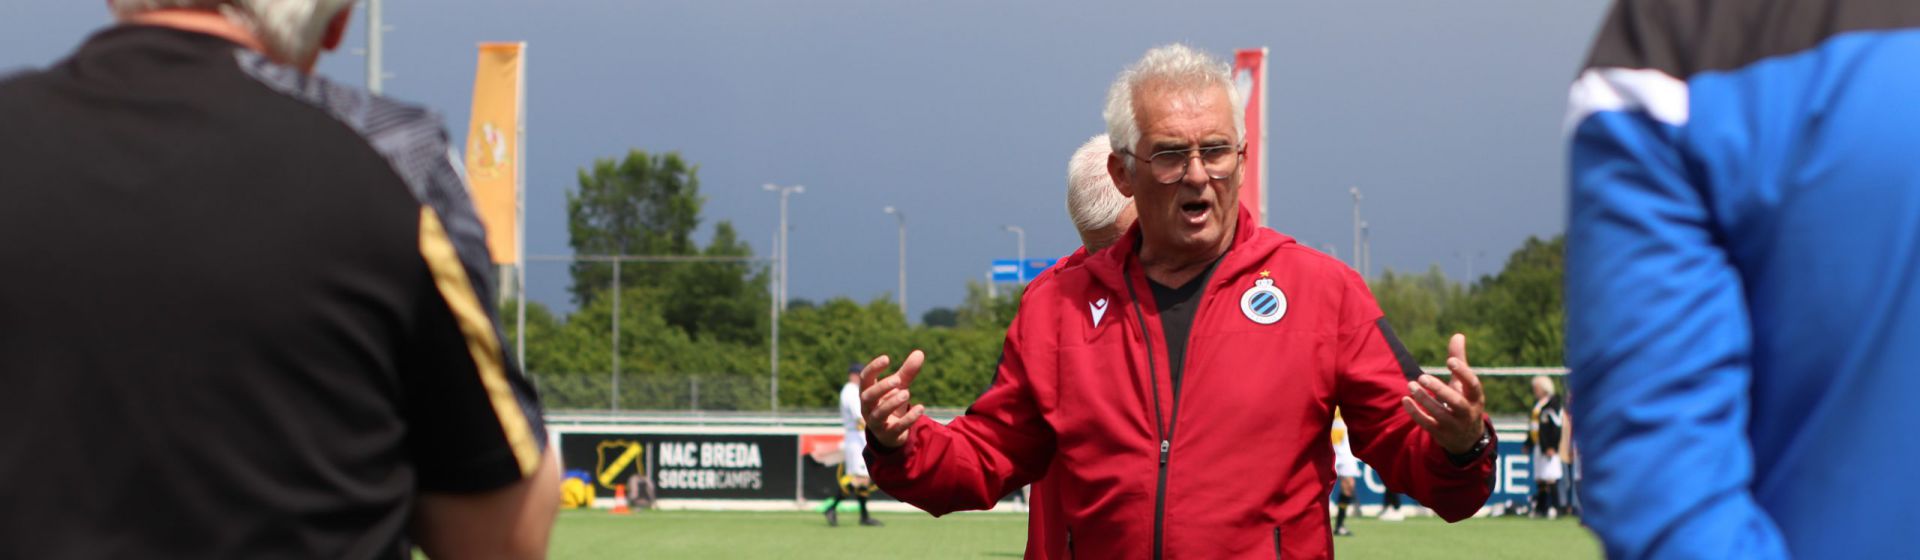 Second EFDN Walking Football League Tournament to take place in Leverkusen on the 22nd of September header